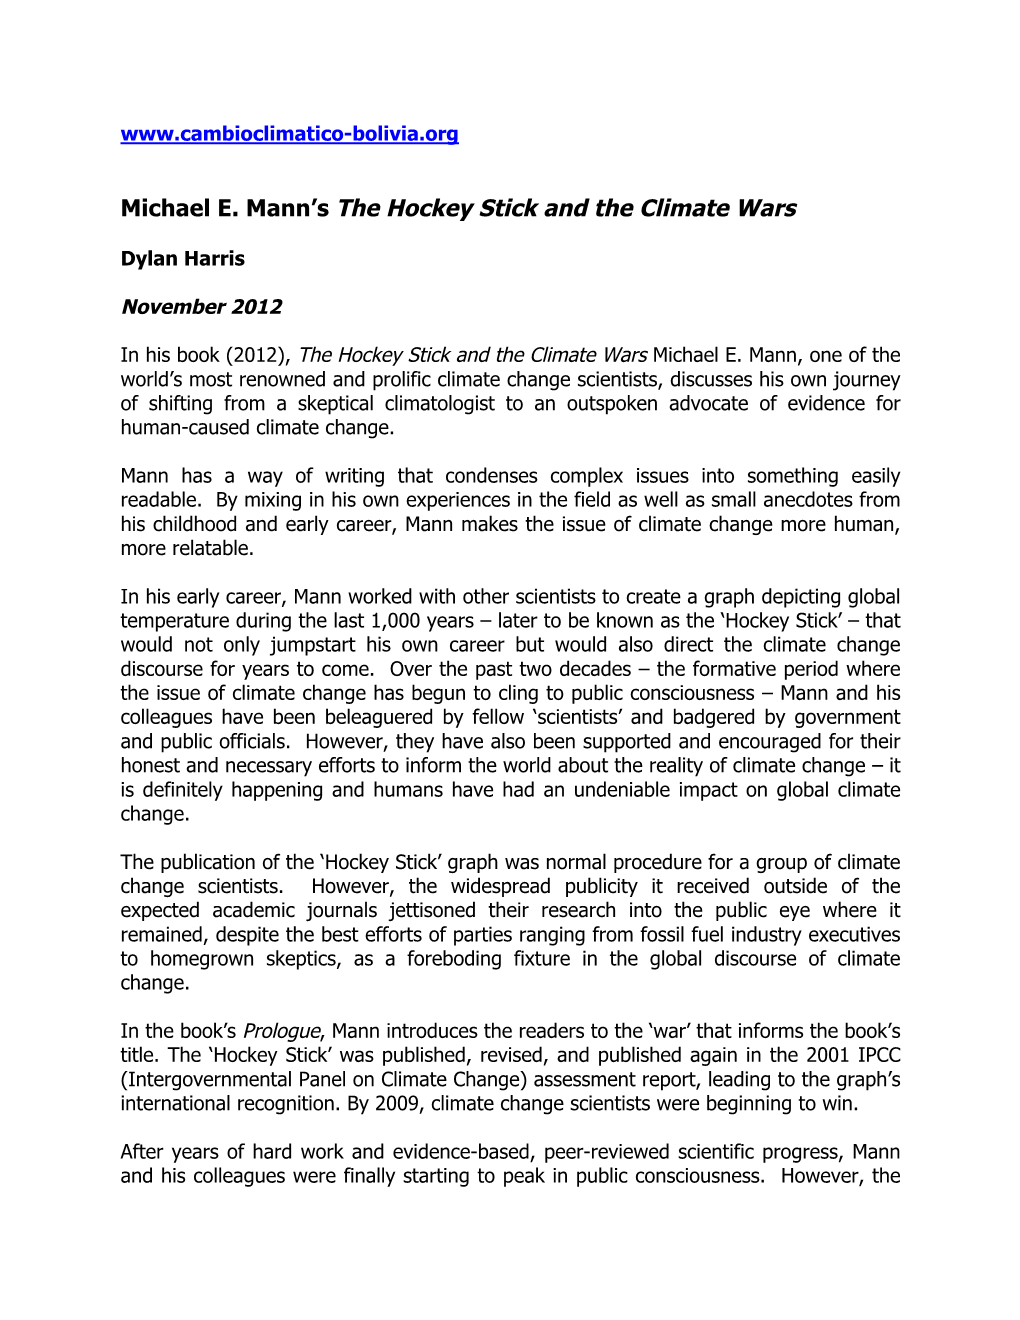 Michael E. Mann's the Hockey Stick and the Climate Wars